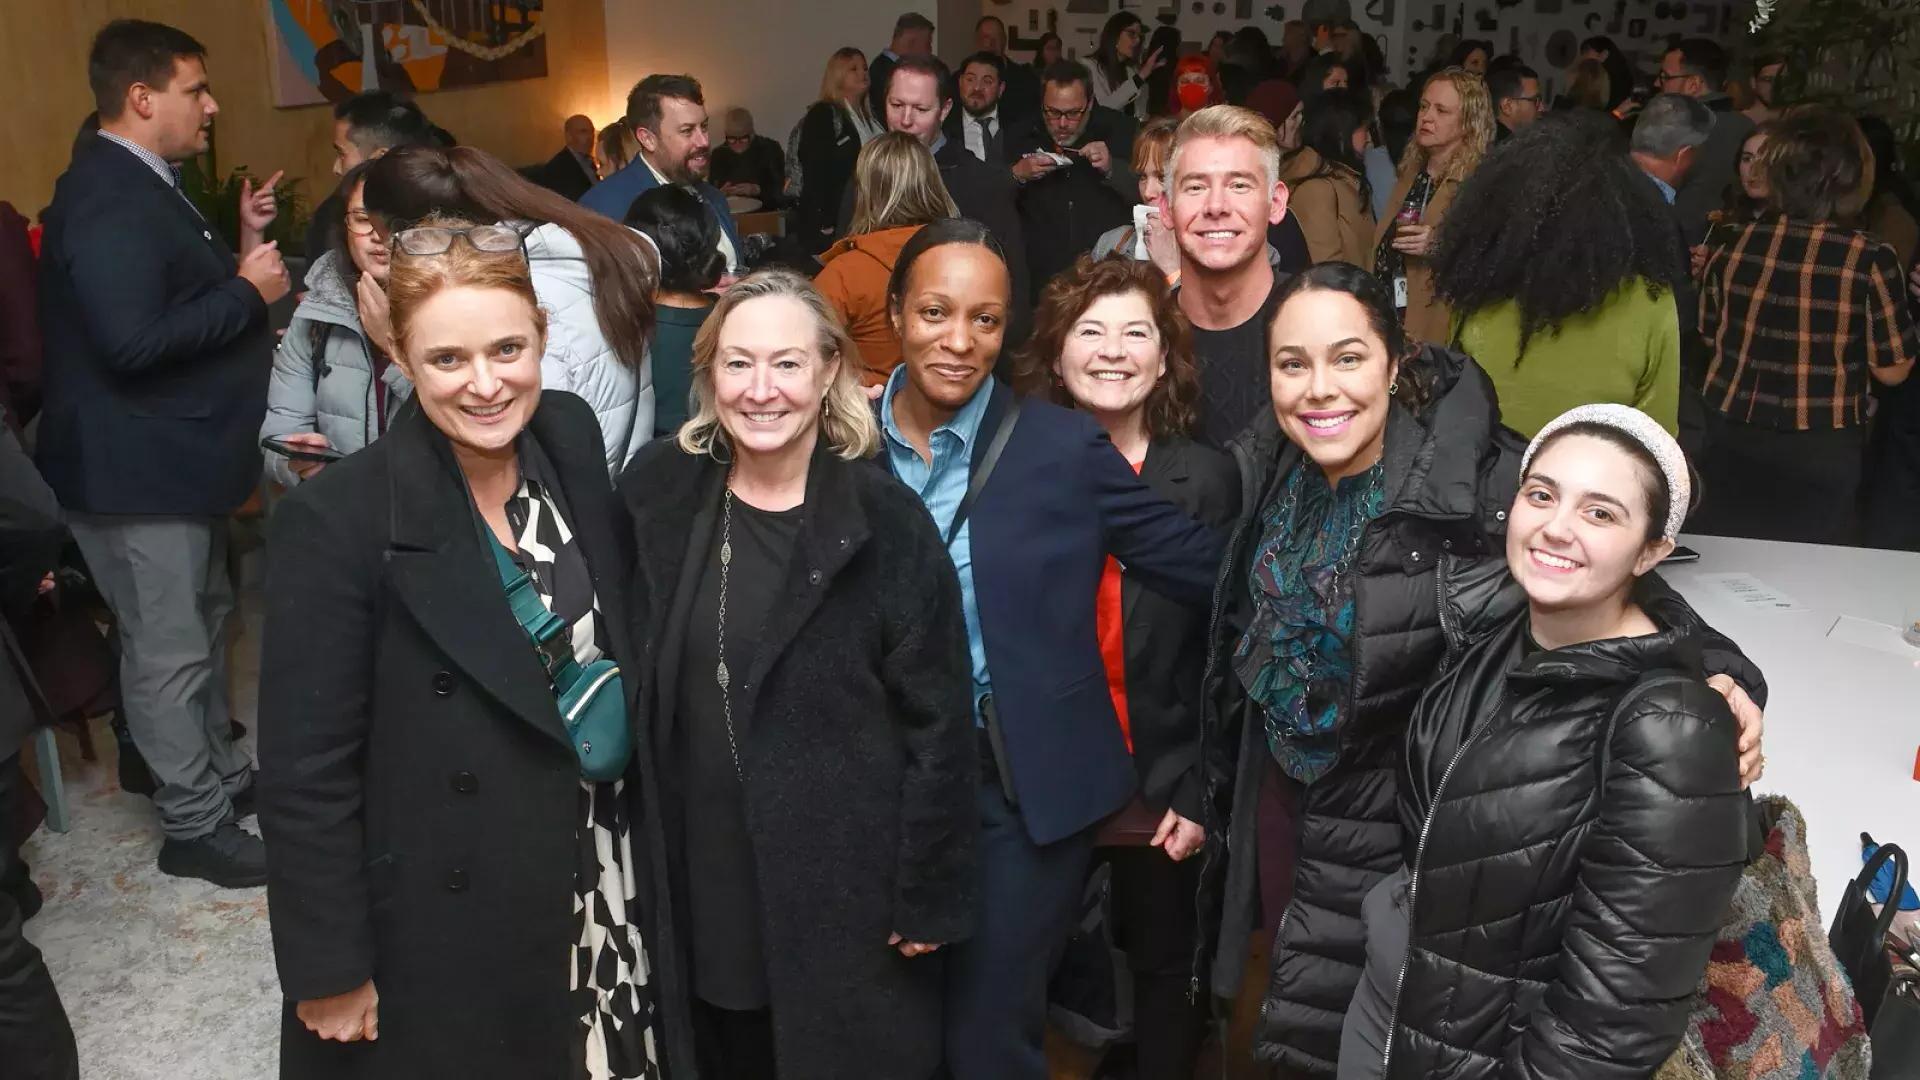 Staff and members gather at an official San Francisco Travel event.